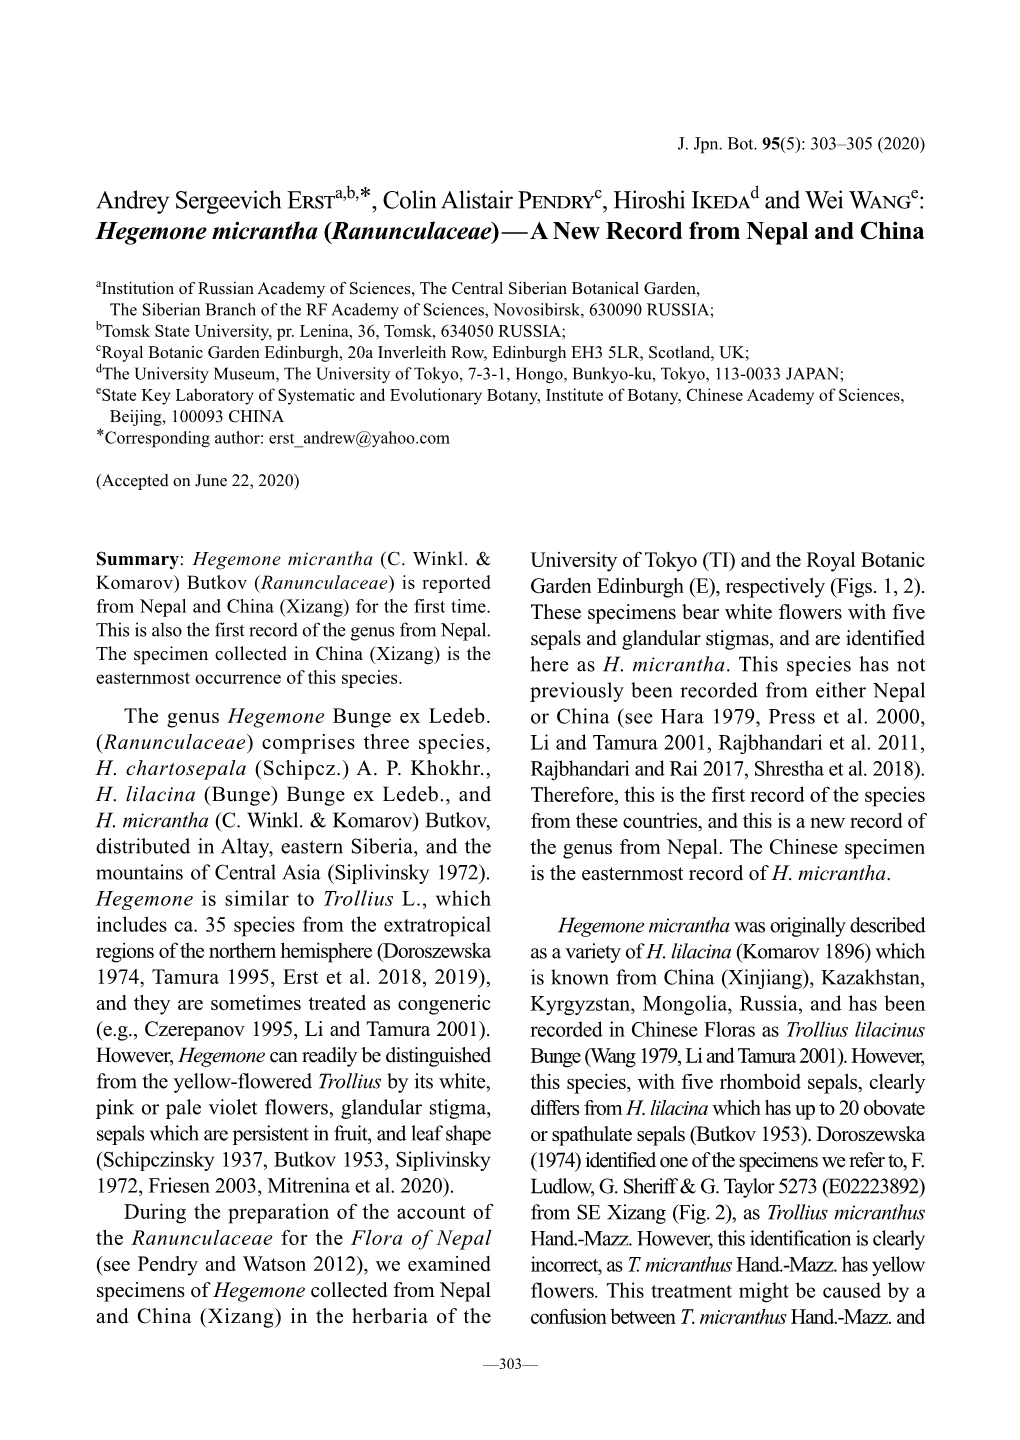 Hegemone Micrantha (Ranunculaceae)—A New Record from Nepal and China